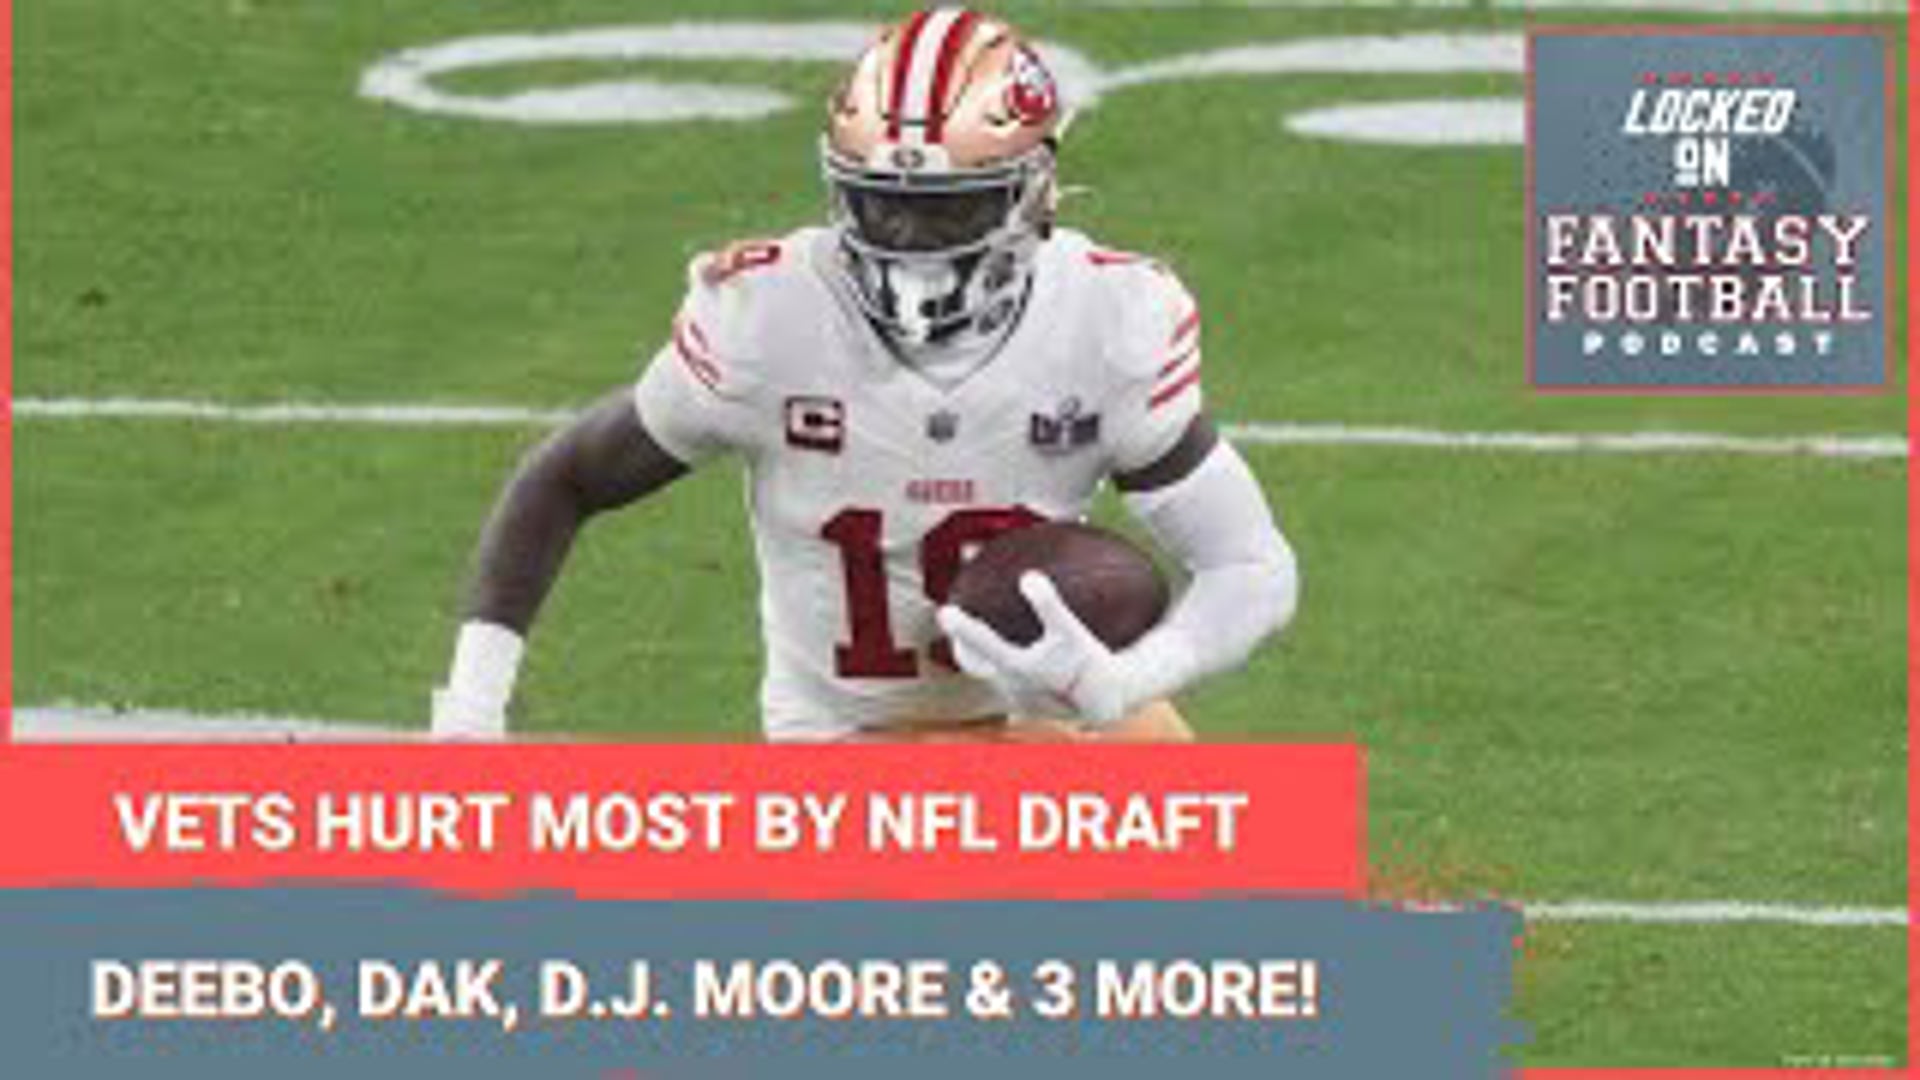 Sporting News.com's Vinnie Iyer and NFL.com's Michelle Magdziuk name six veteran offensive skill players whose fantasy football values were hurt most by the draft.